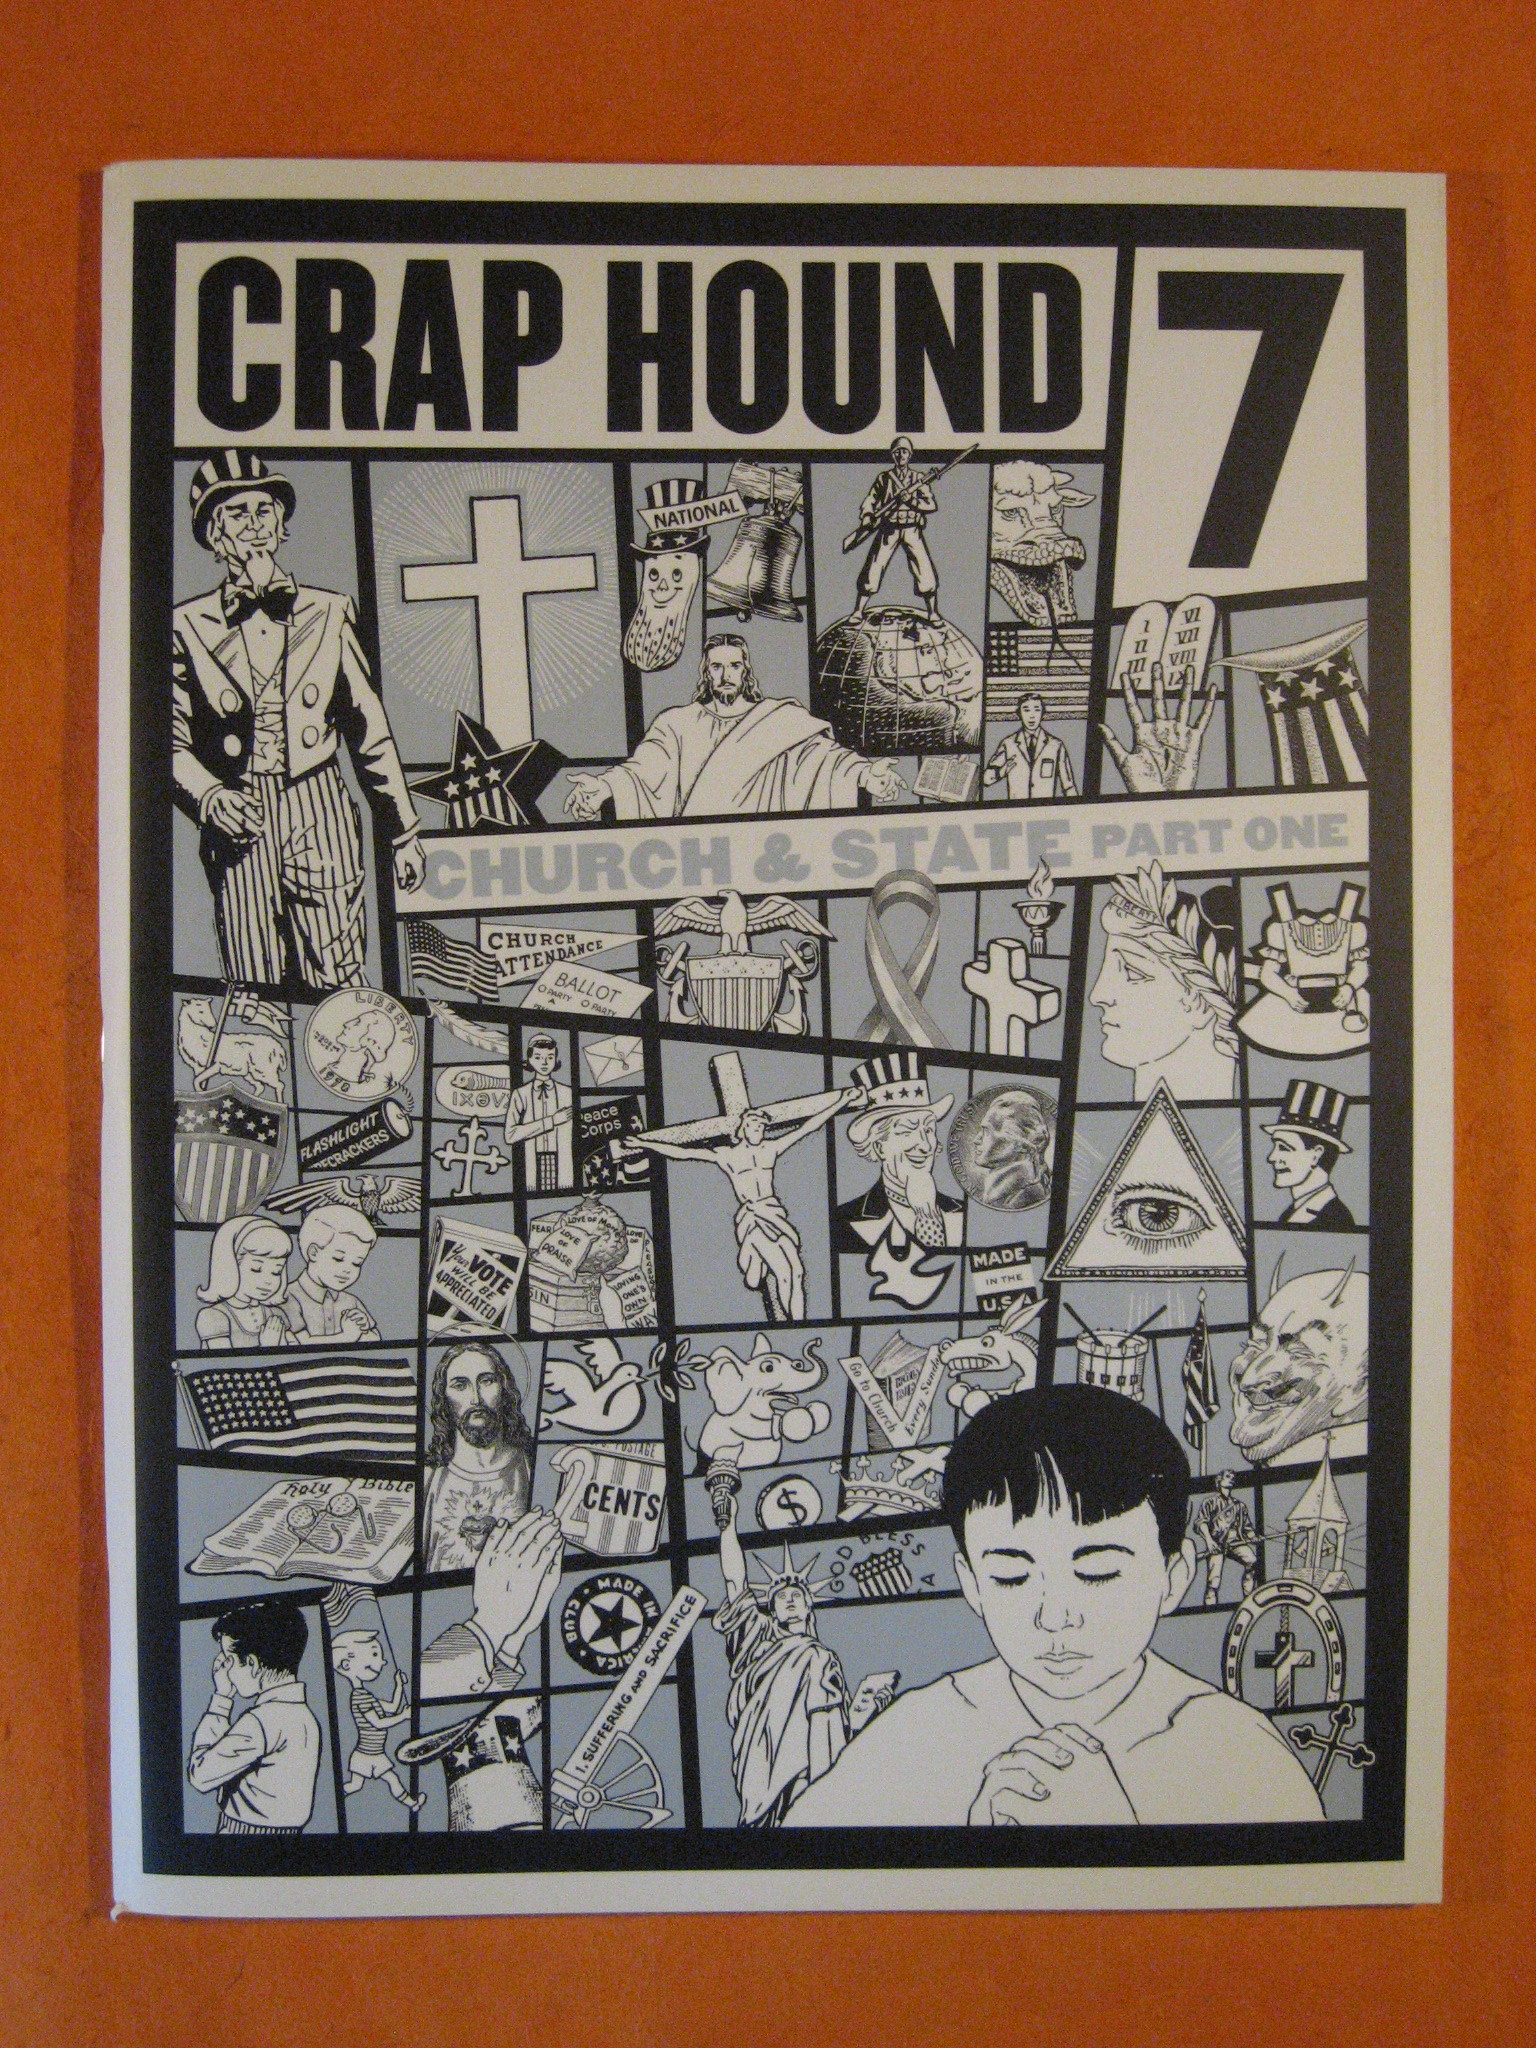 Image for Crap Hound #7:  Church & State Part One